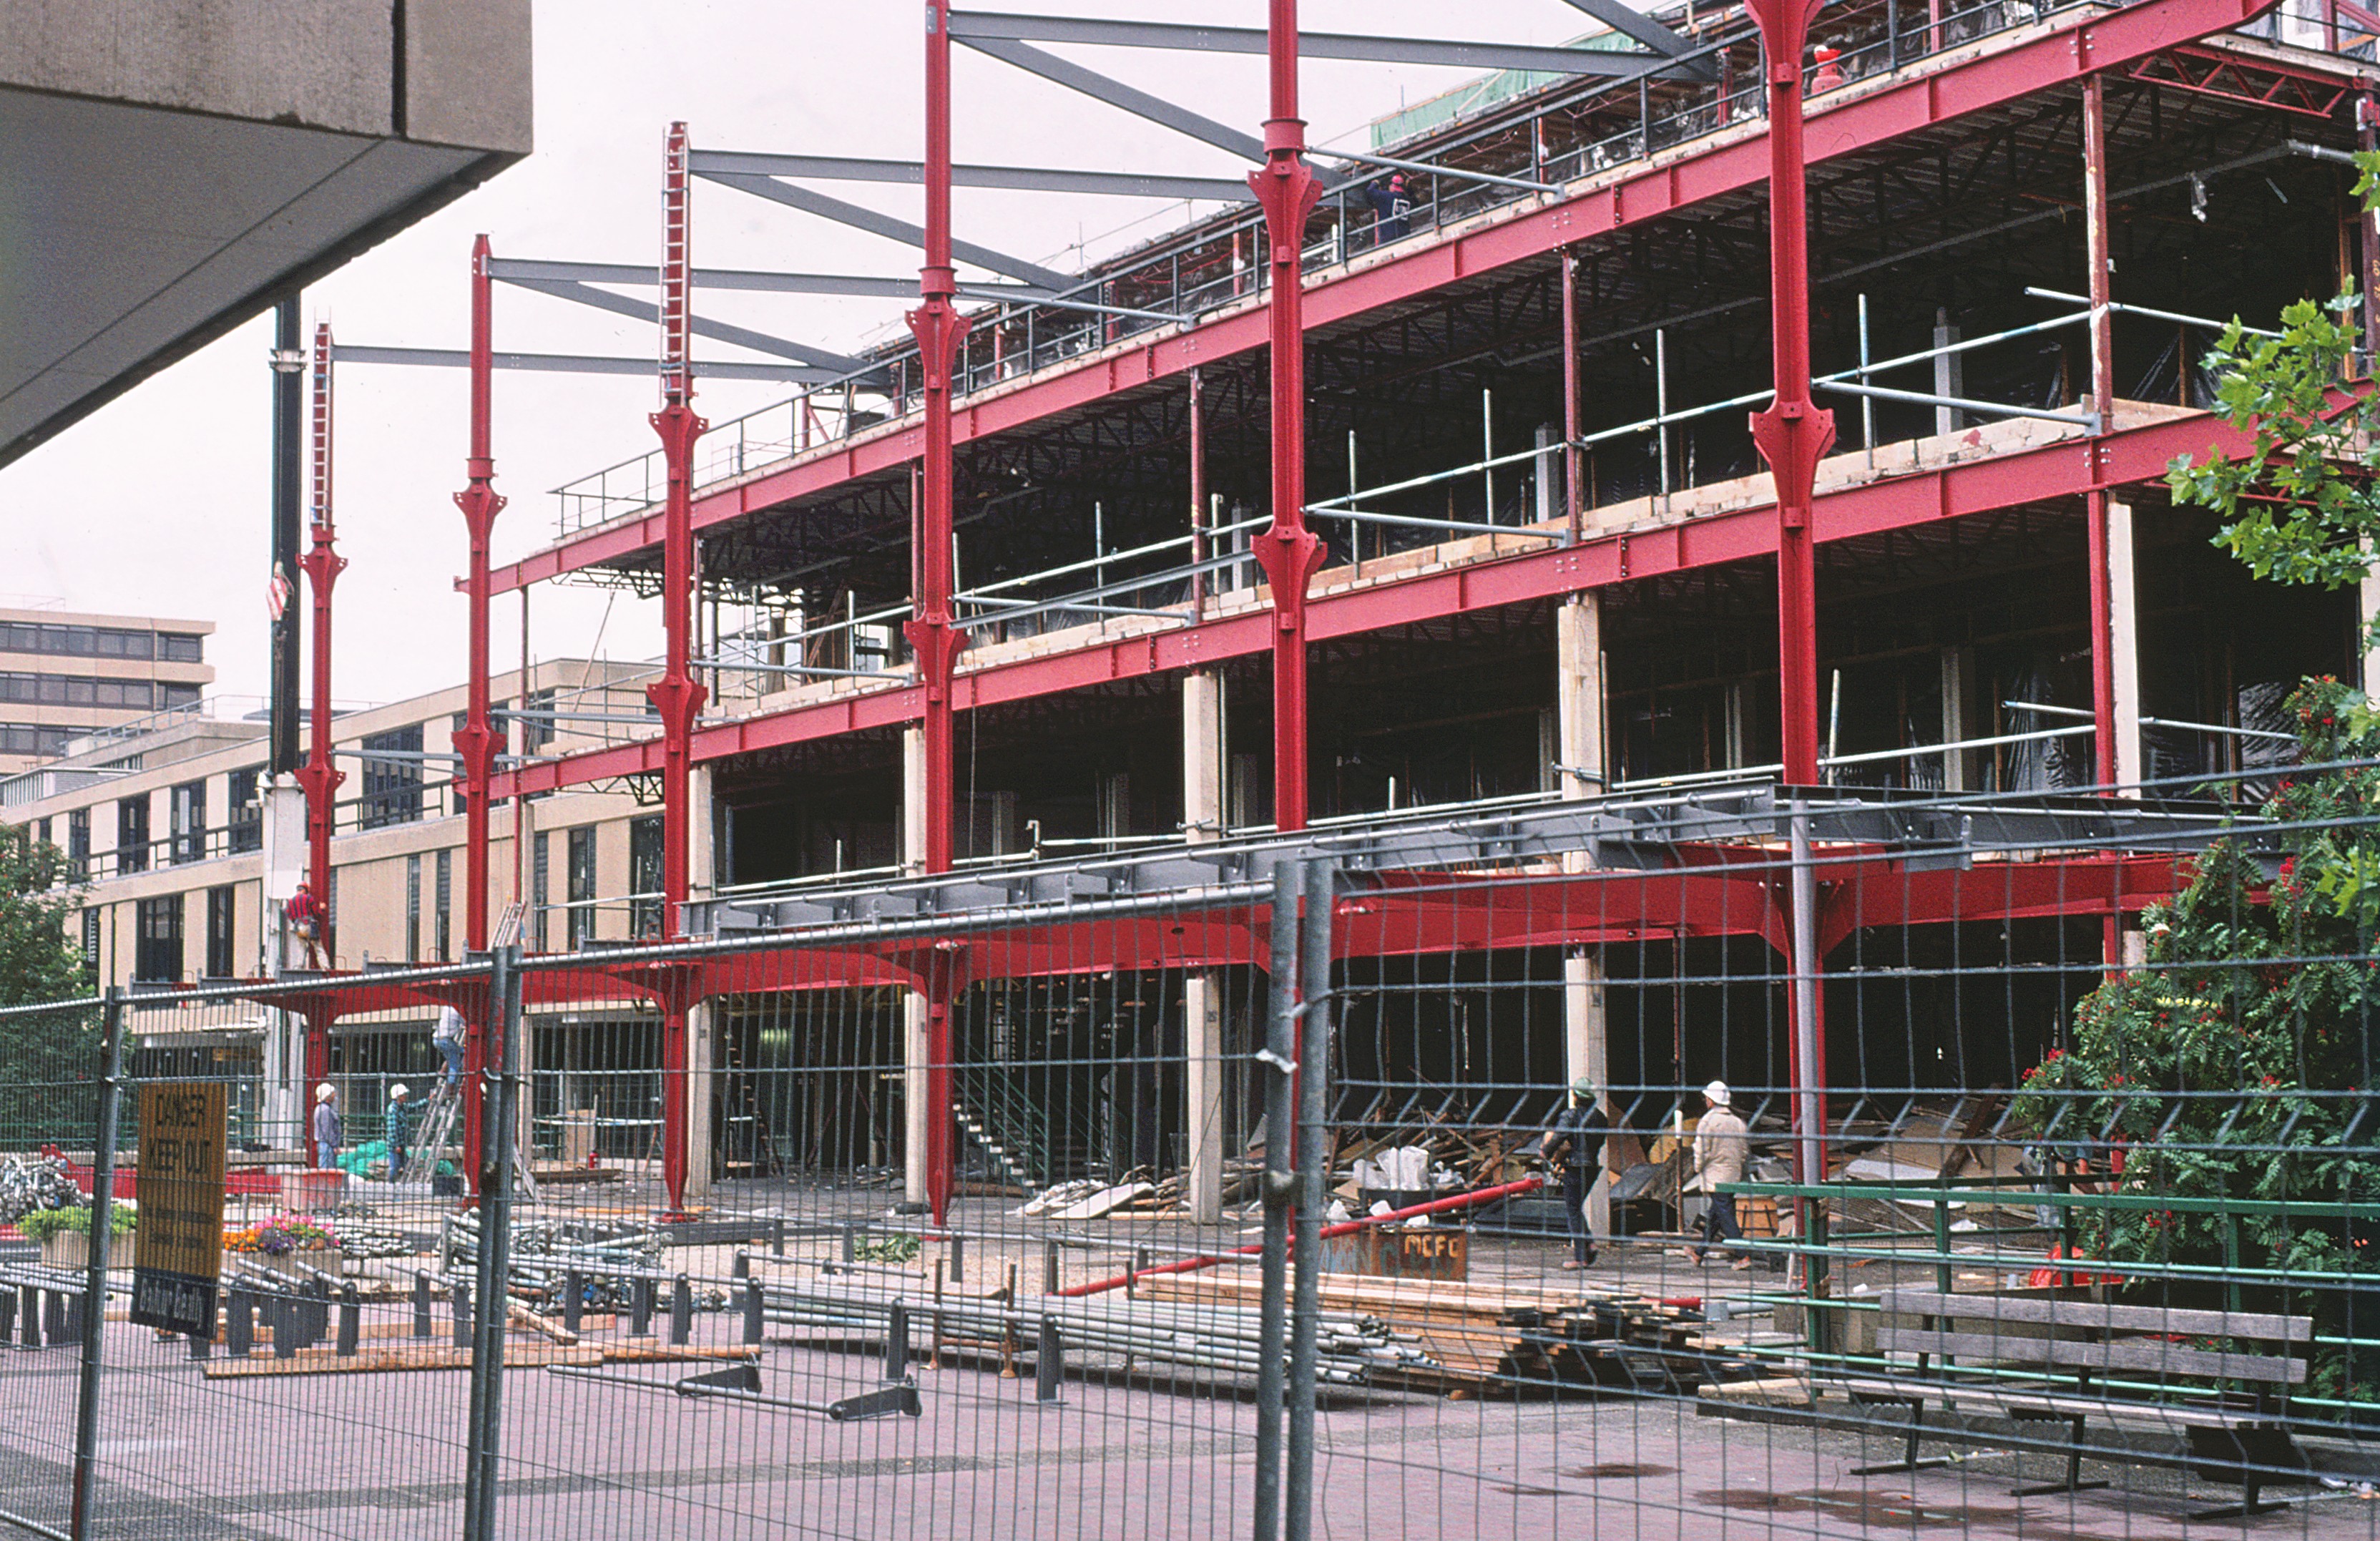 Colour photographic image showing extension and refurbishment of the University Library (exterior) in progress, October 1995.